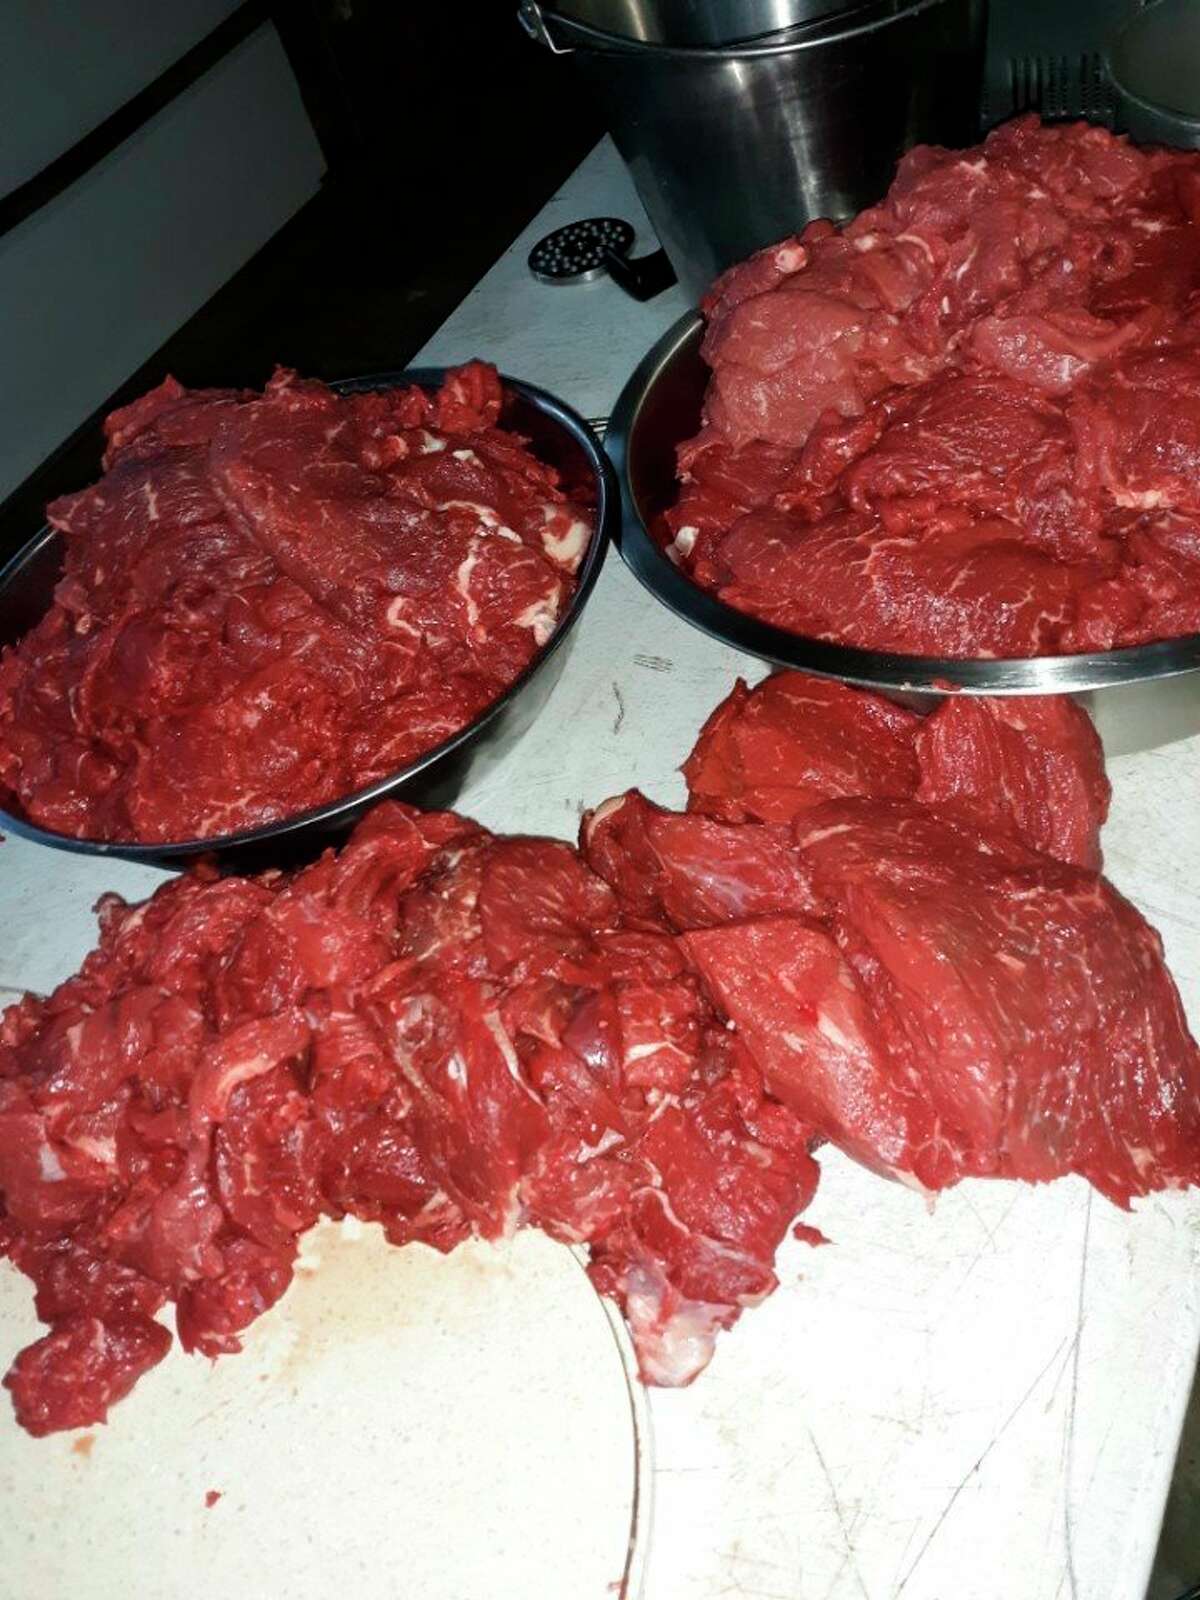 Steaks cut and ready to package from beef freshly butchered by the Eicher family. (Courtesy photo)